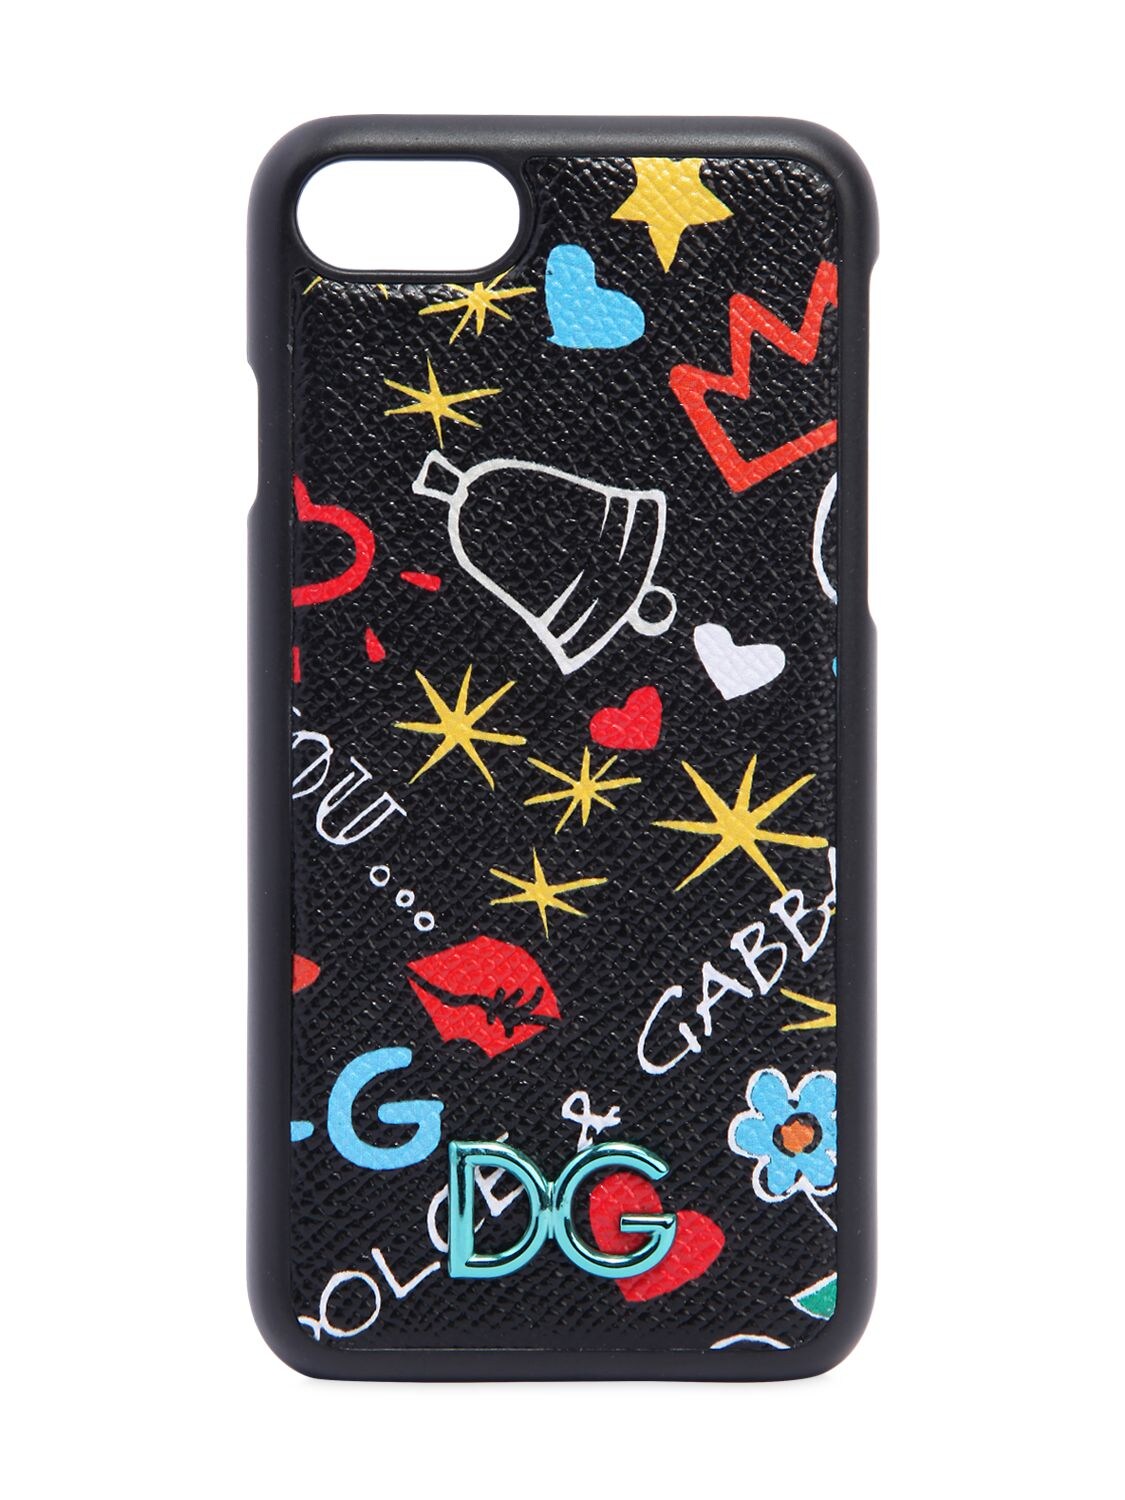 GRAFFITI PRINTED LEATHER IPHONE 7 COVER